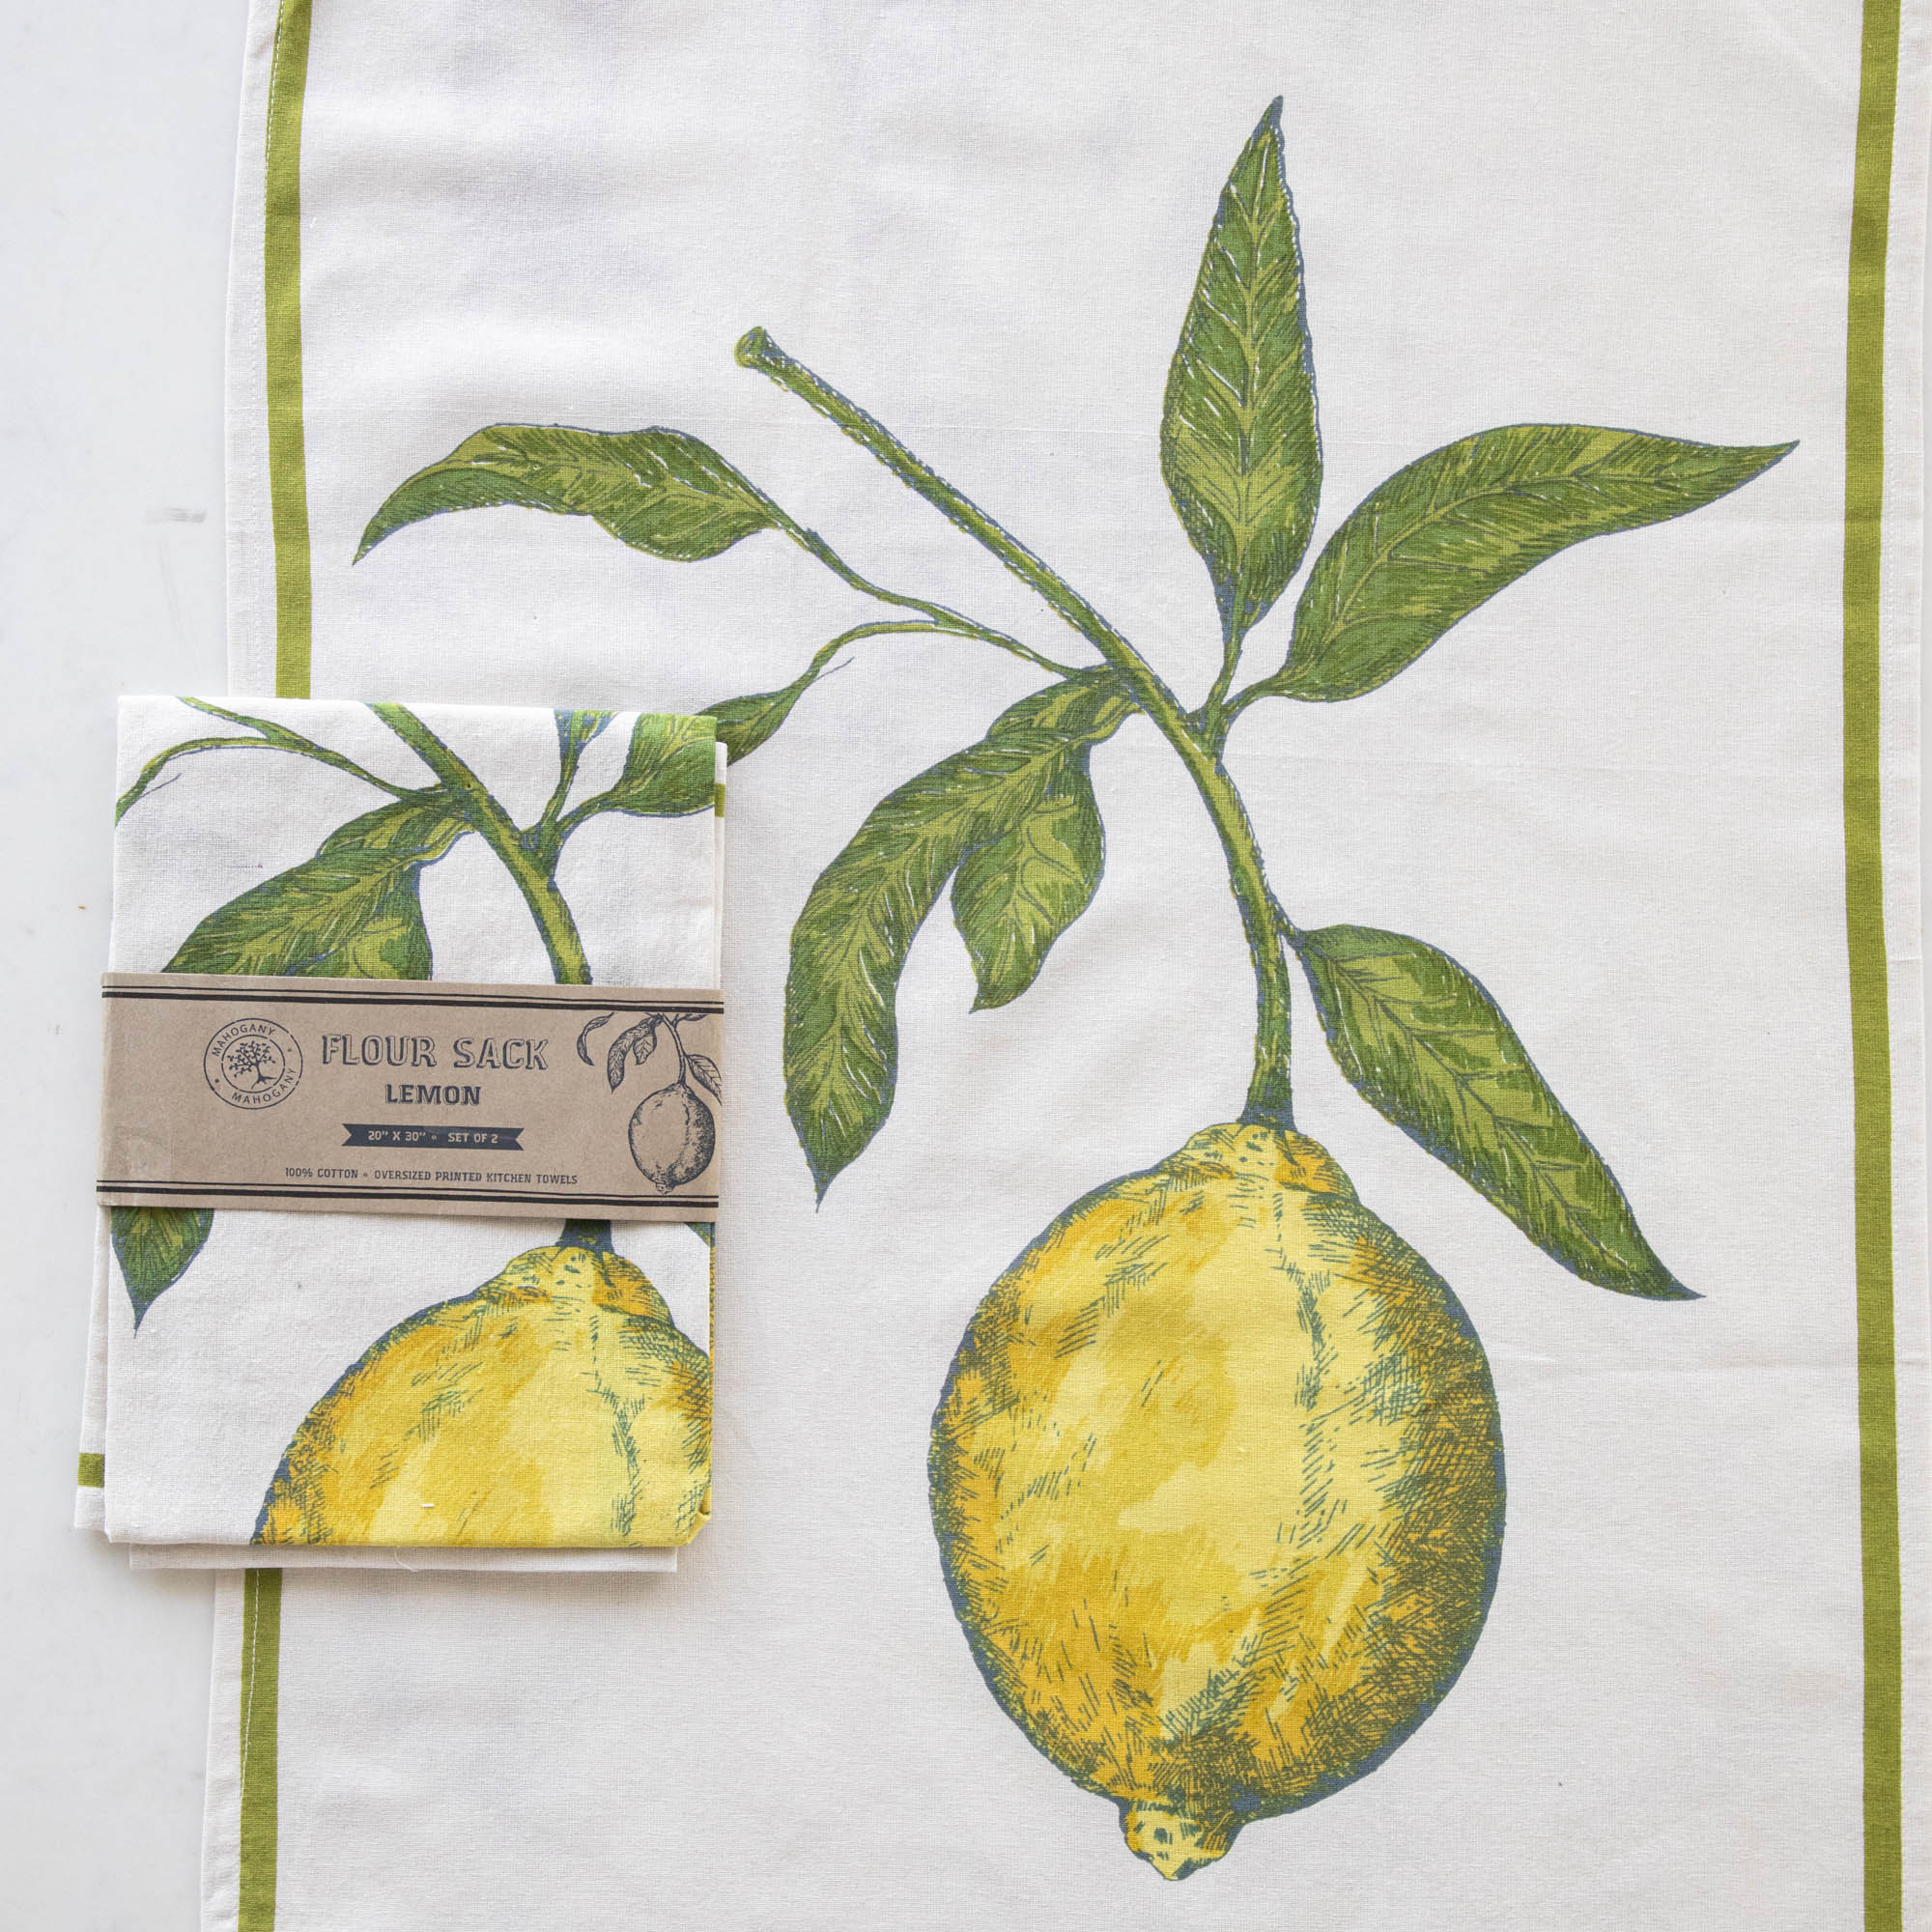 A Lemon Flour Sack Kitchen Towel Set of 2 with a lemon design hanging on a wooden deck railing, with a bowl of lemons in the background. (Mahogany)